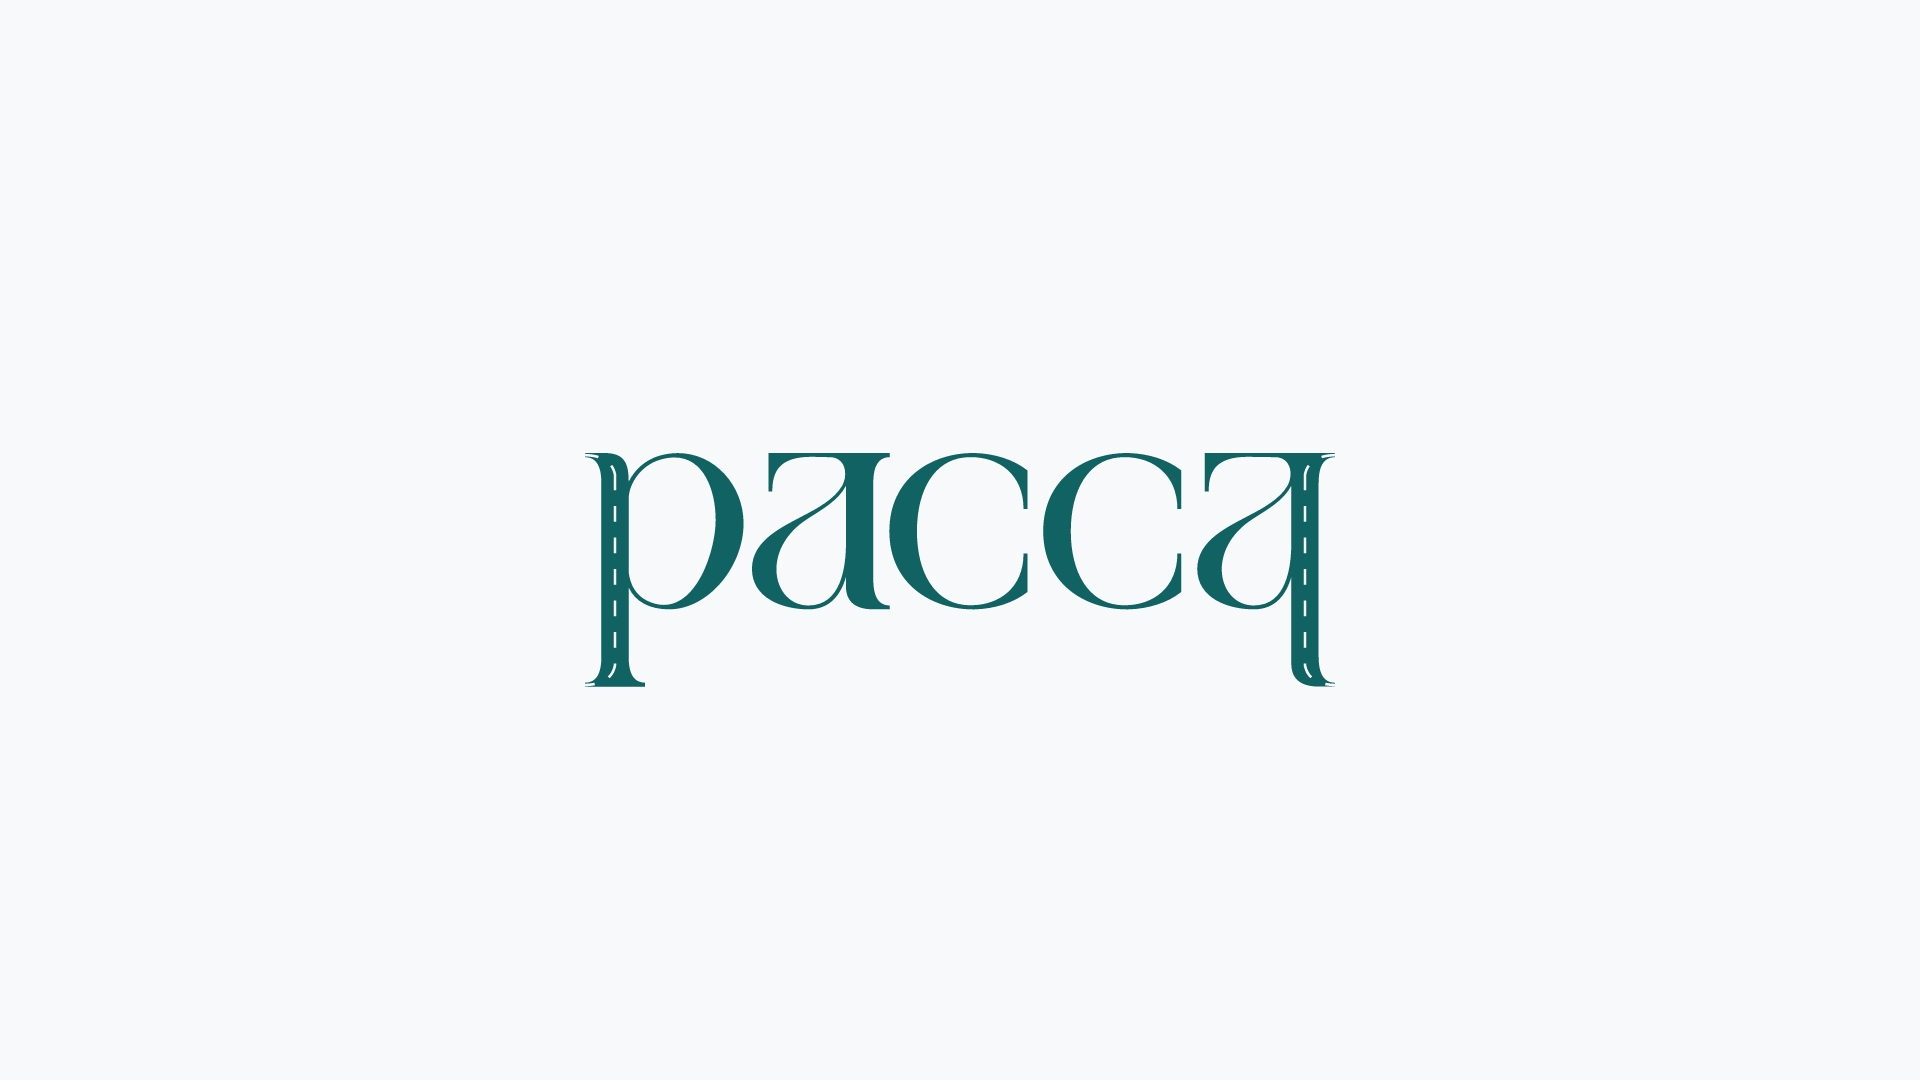 PACCA